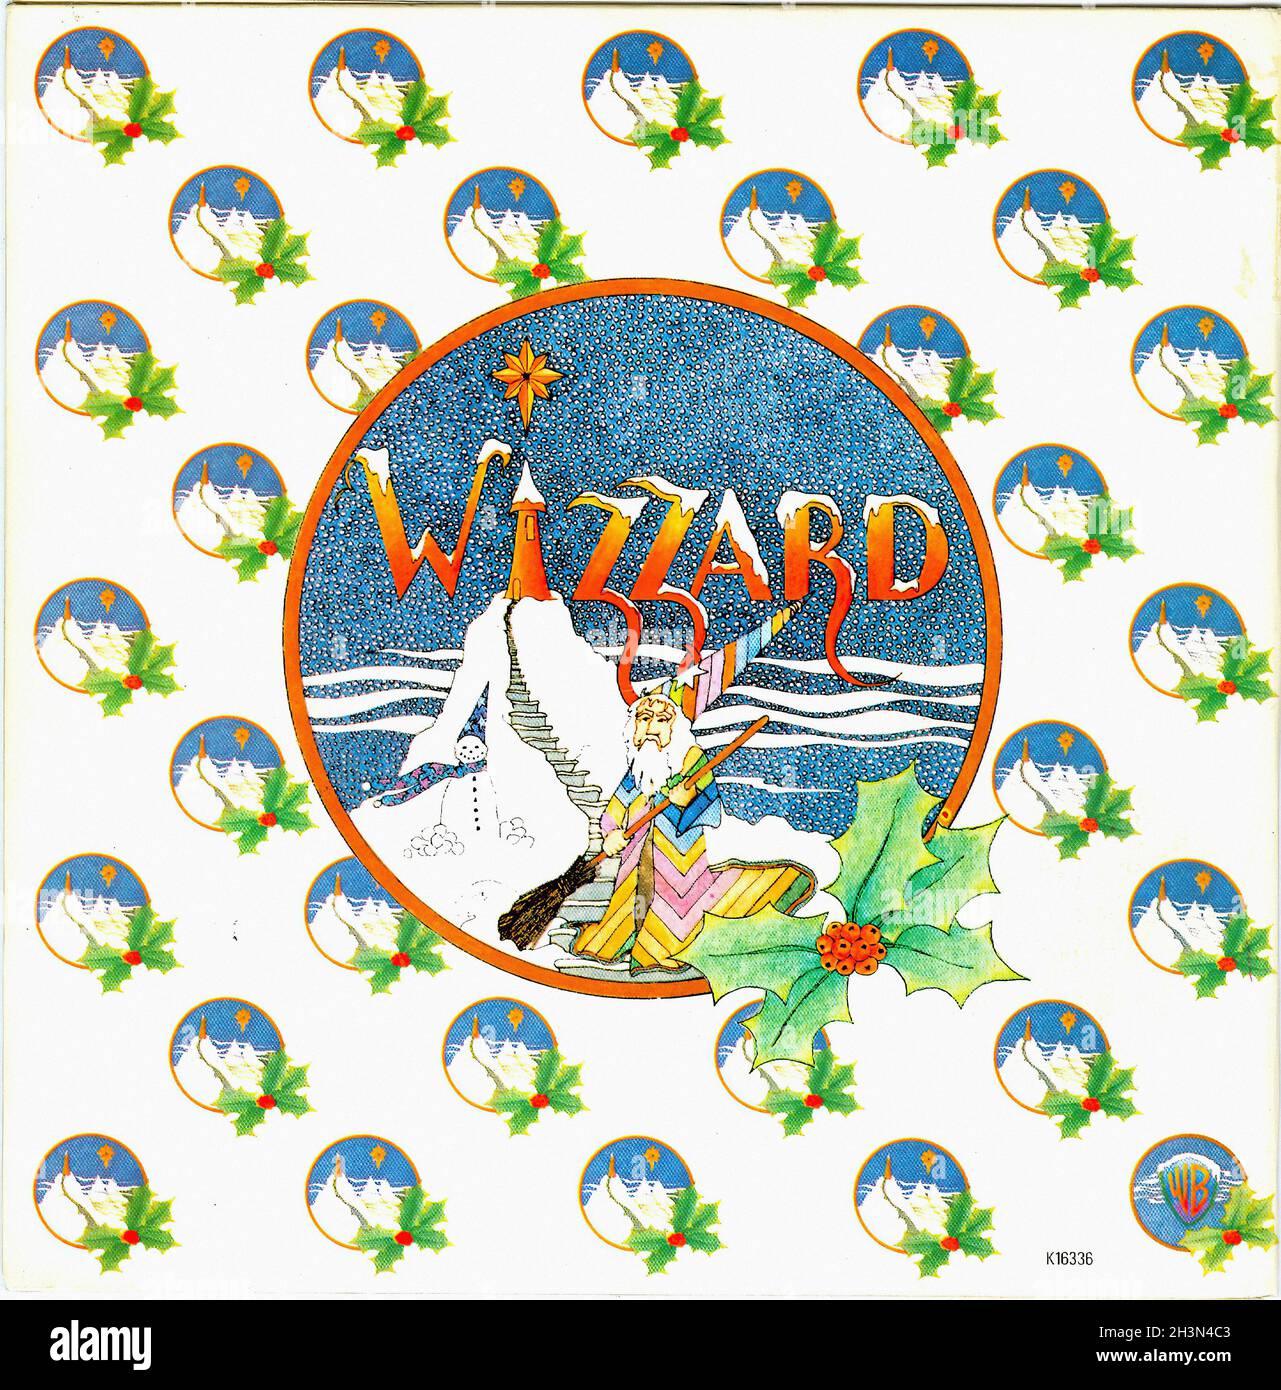 Vintage Vinyl Recording - Wizzard - I Wish It Could Be Christmas Everyday - UK - 1973 01 Stock Photo